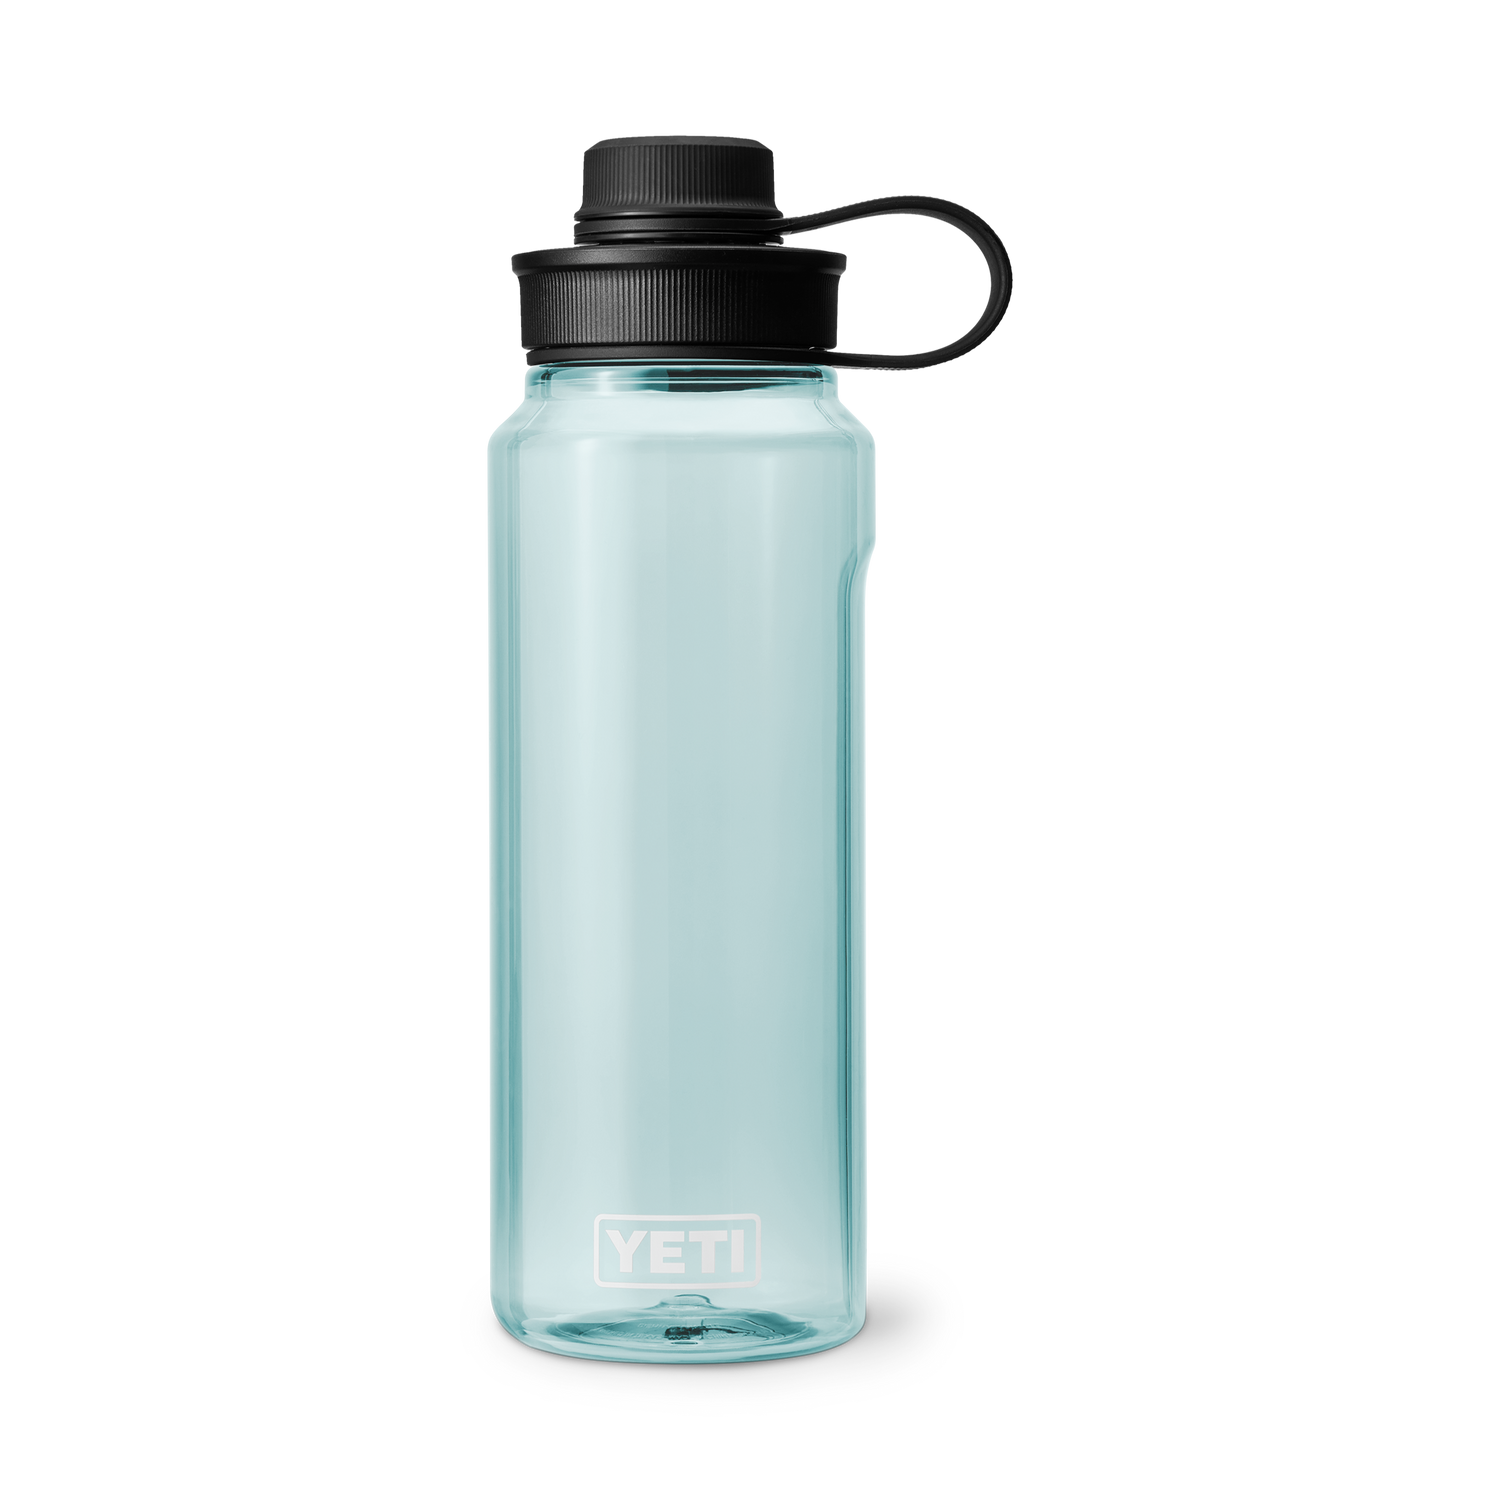 site_studio_Drinkware_Yonder_Tether_Accs_1L_Seafoam_Front_0763_Primary_B_2400x2400.png